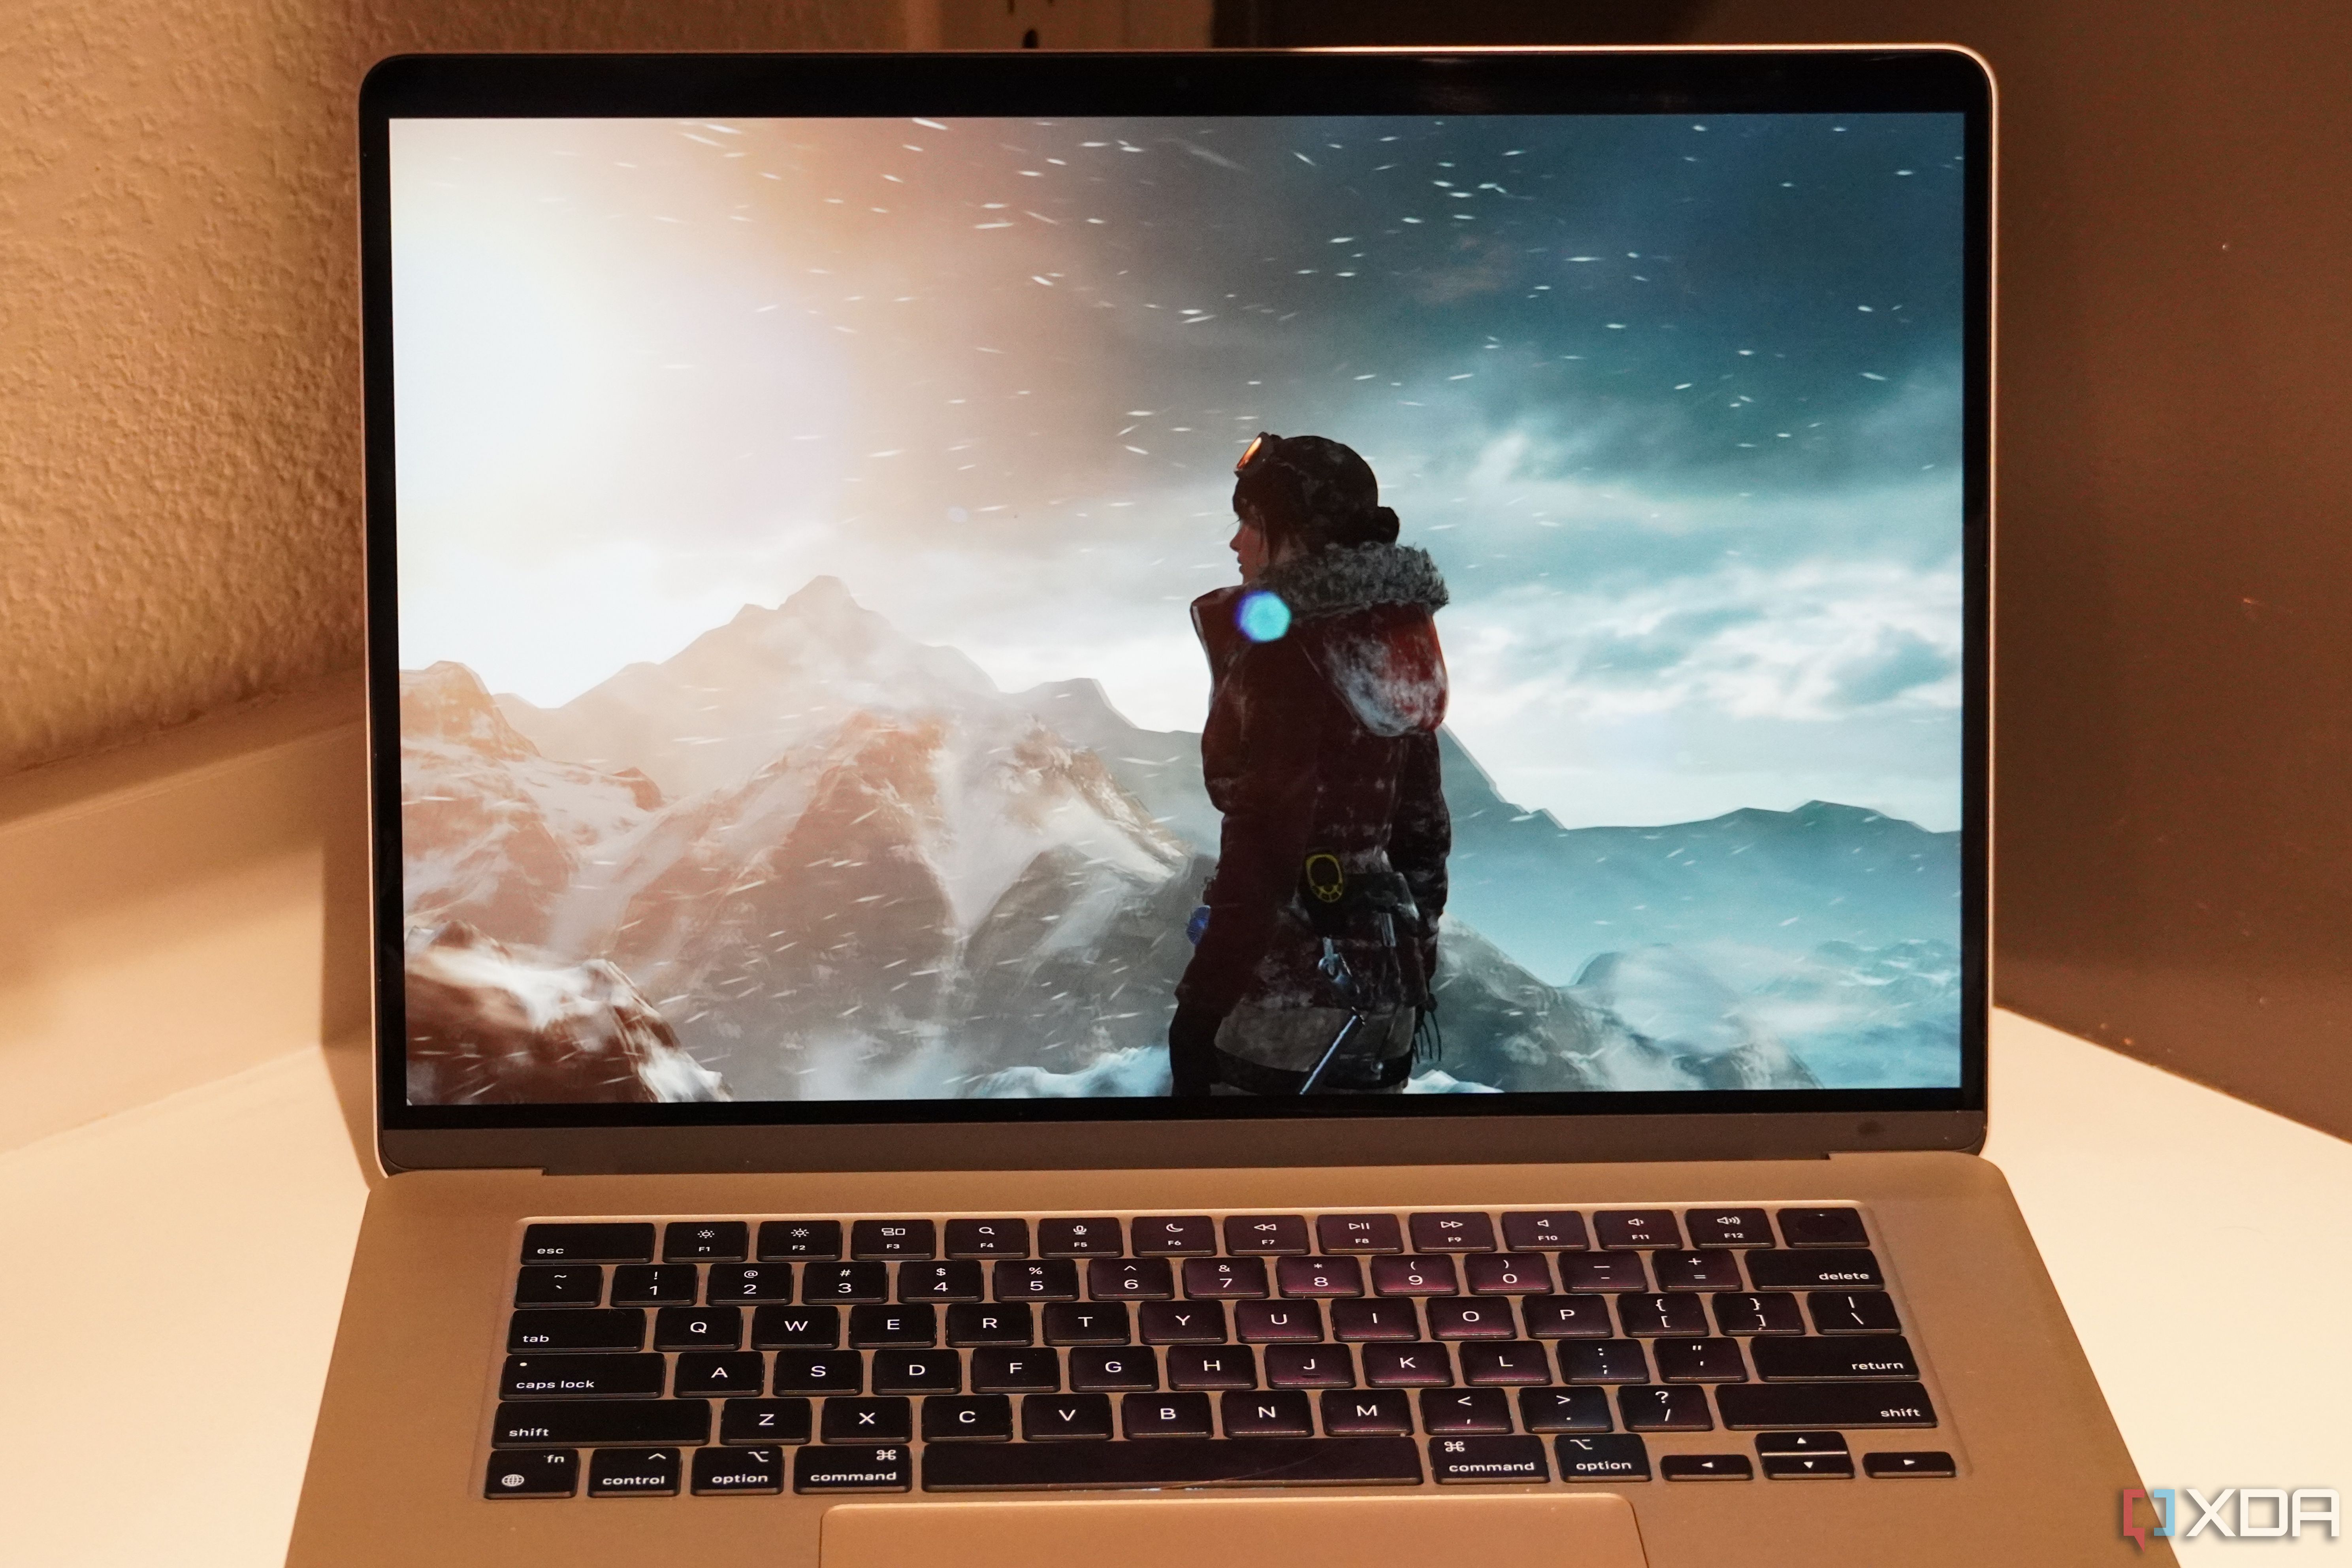 Rise of the Tomb Raider benchmark running on macOS Sonoma.